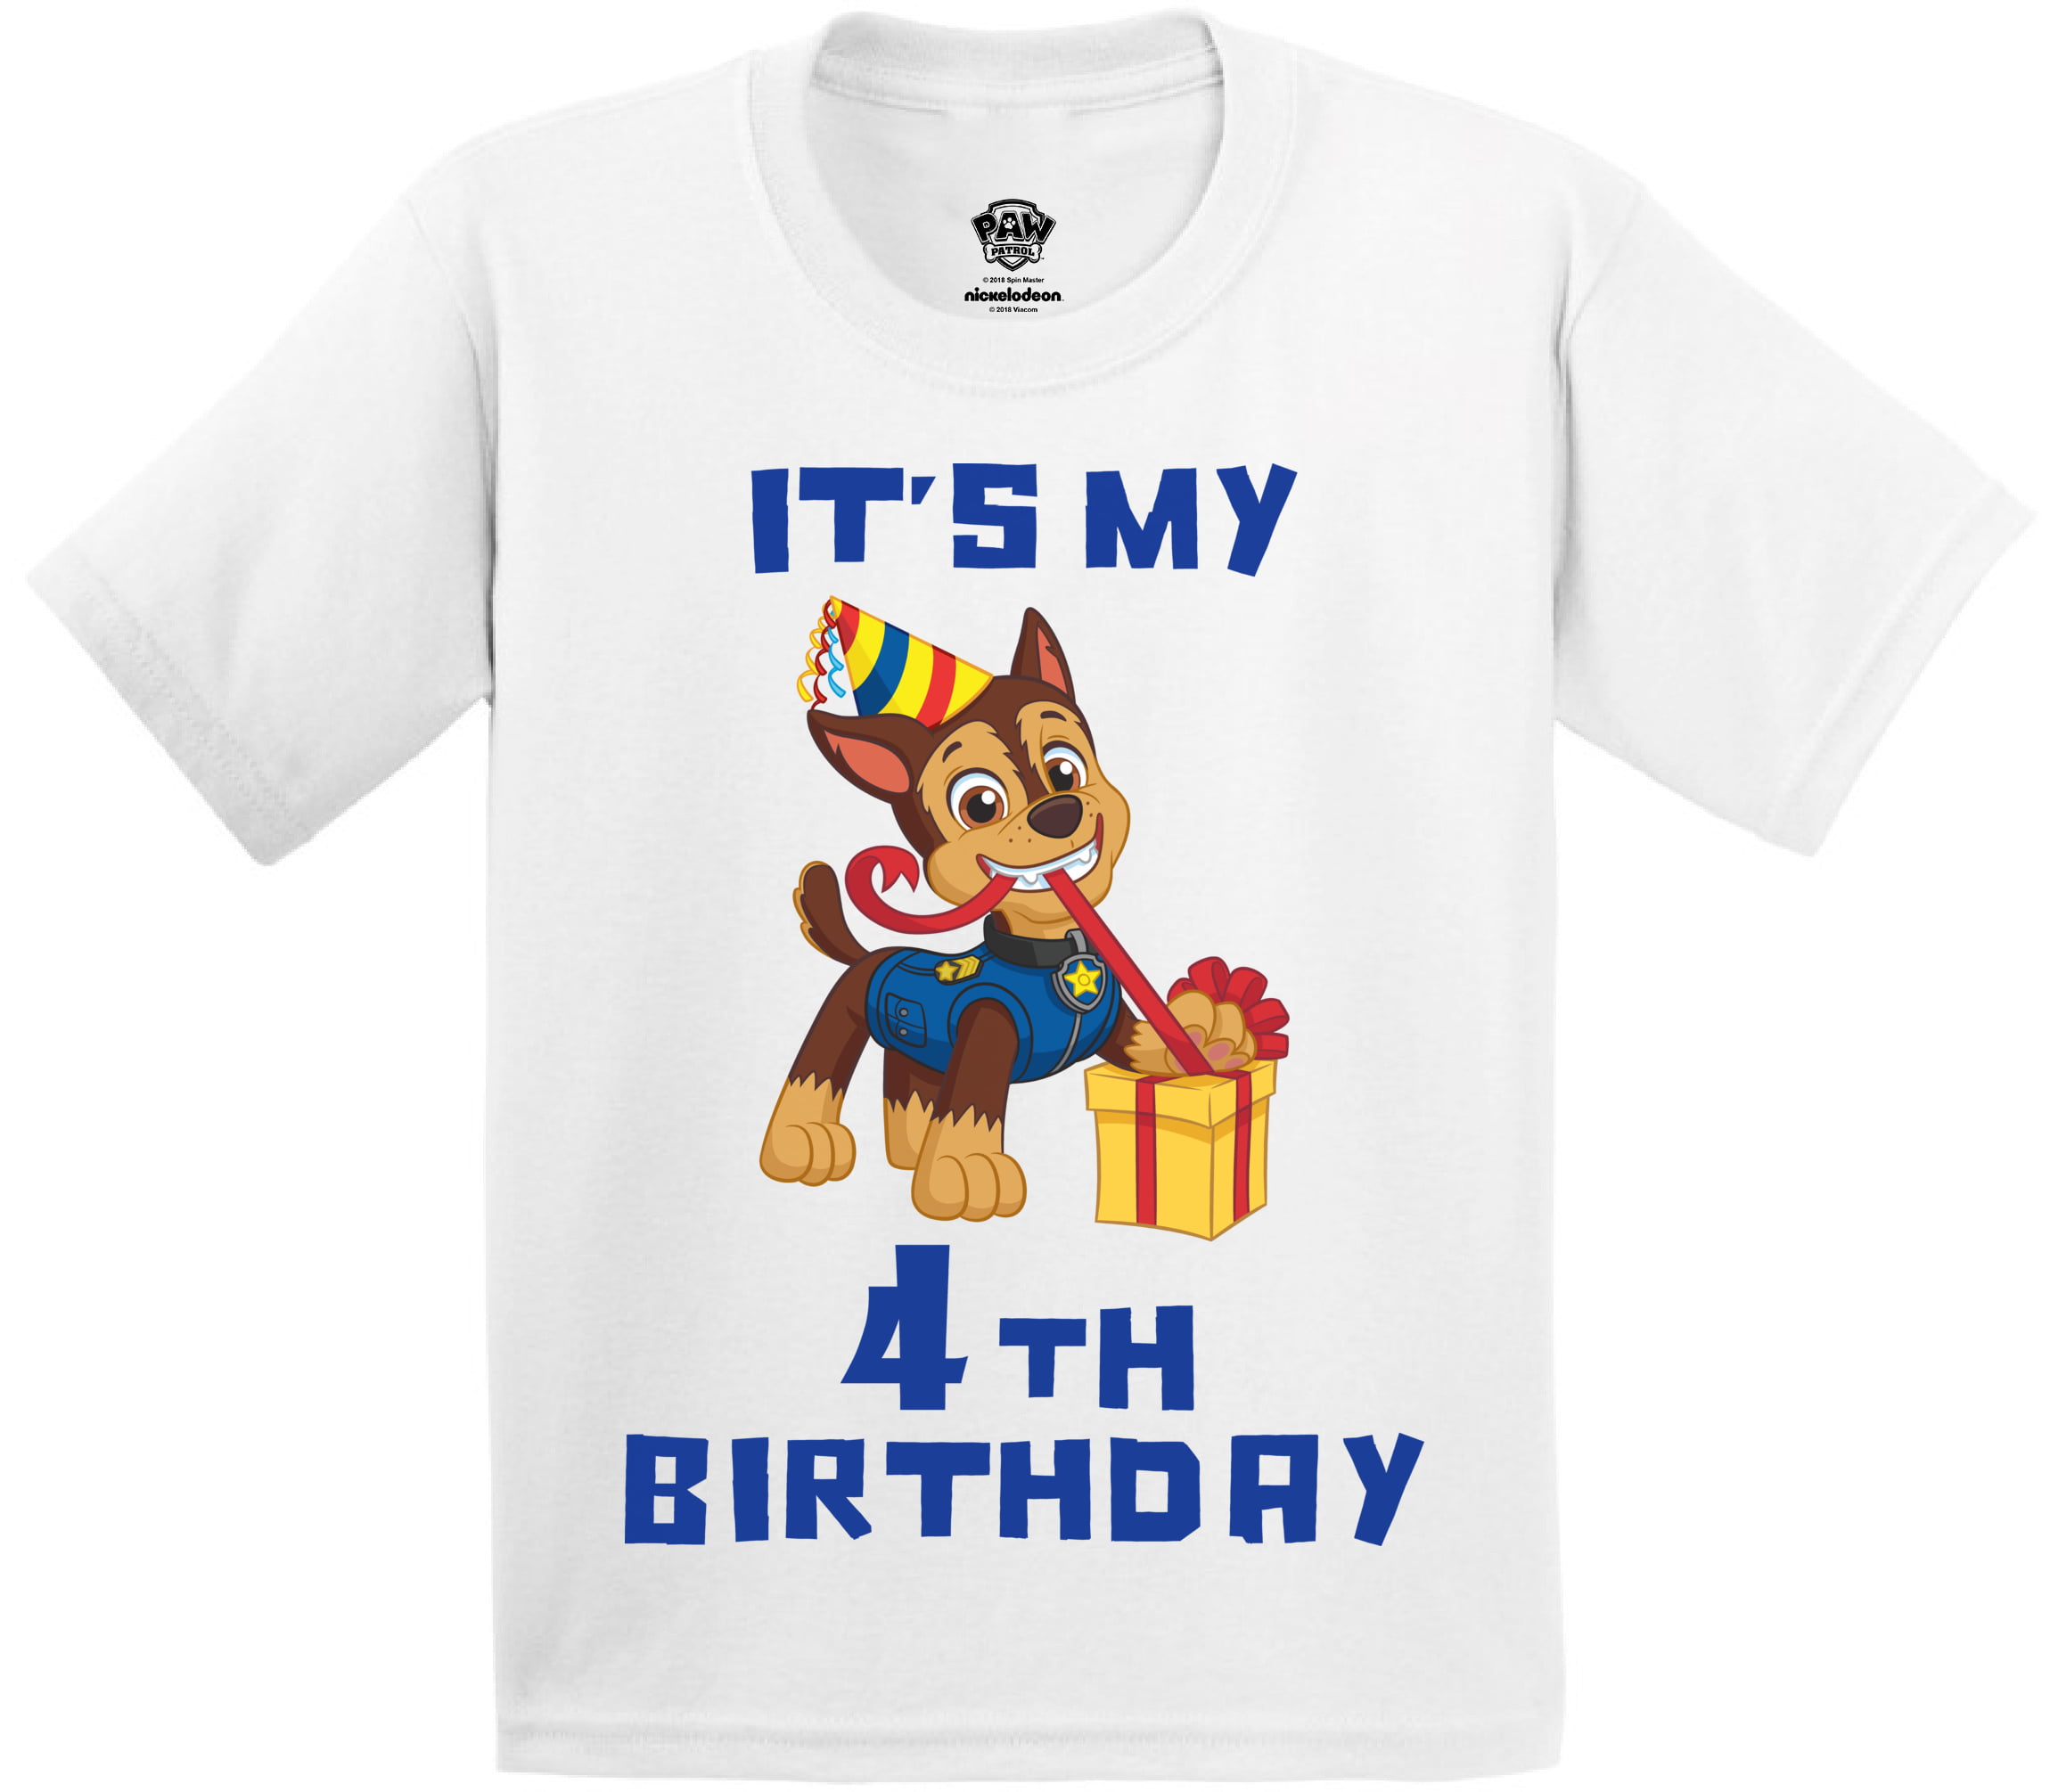 Paw patrol birthday T-shirt featuring chase/personalised/kids/toddler/baby/child 